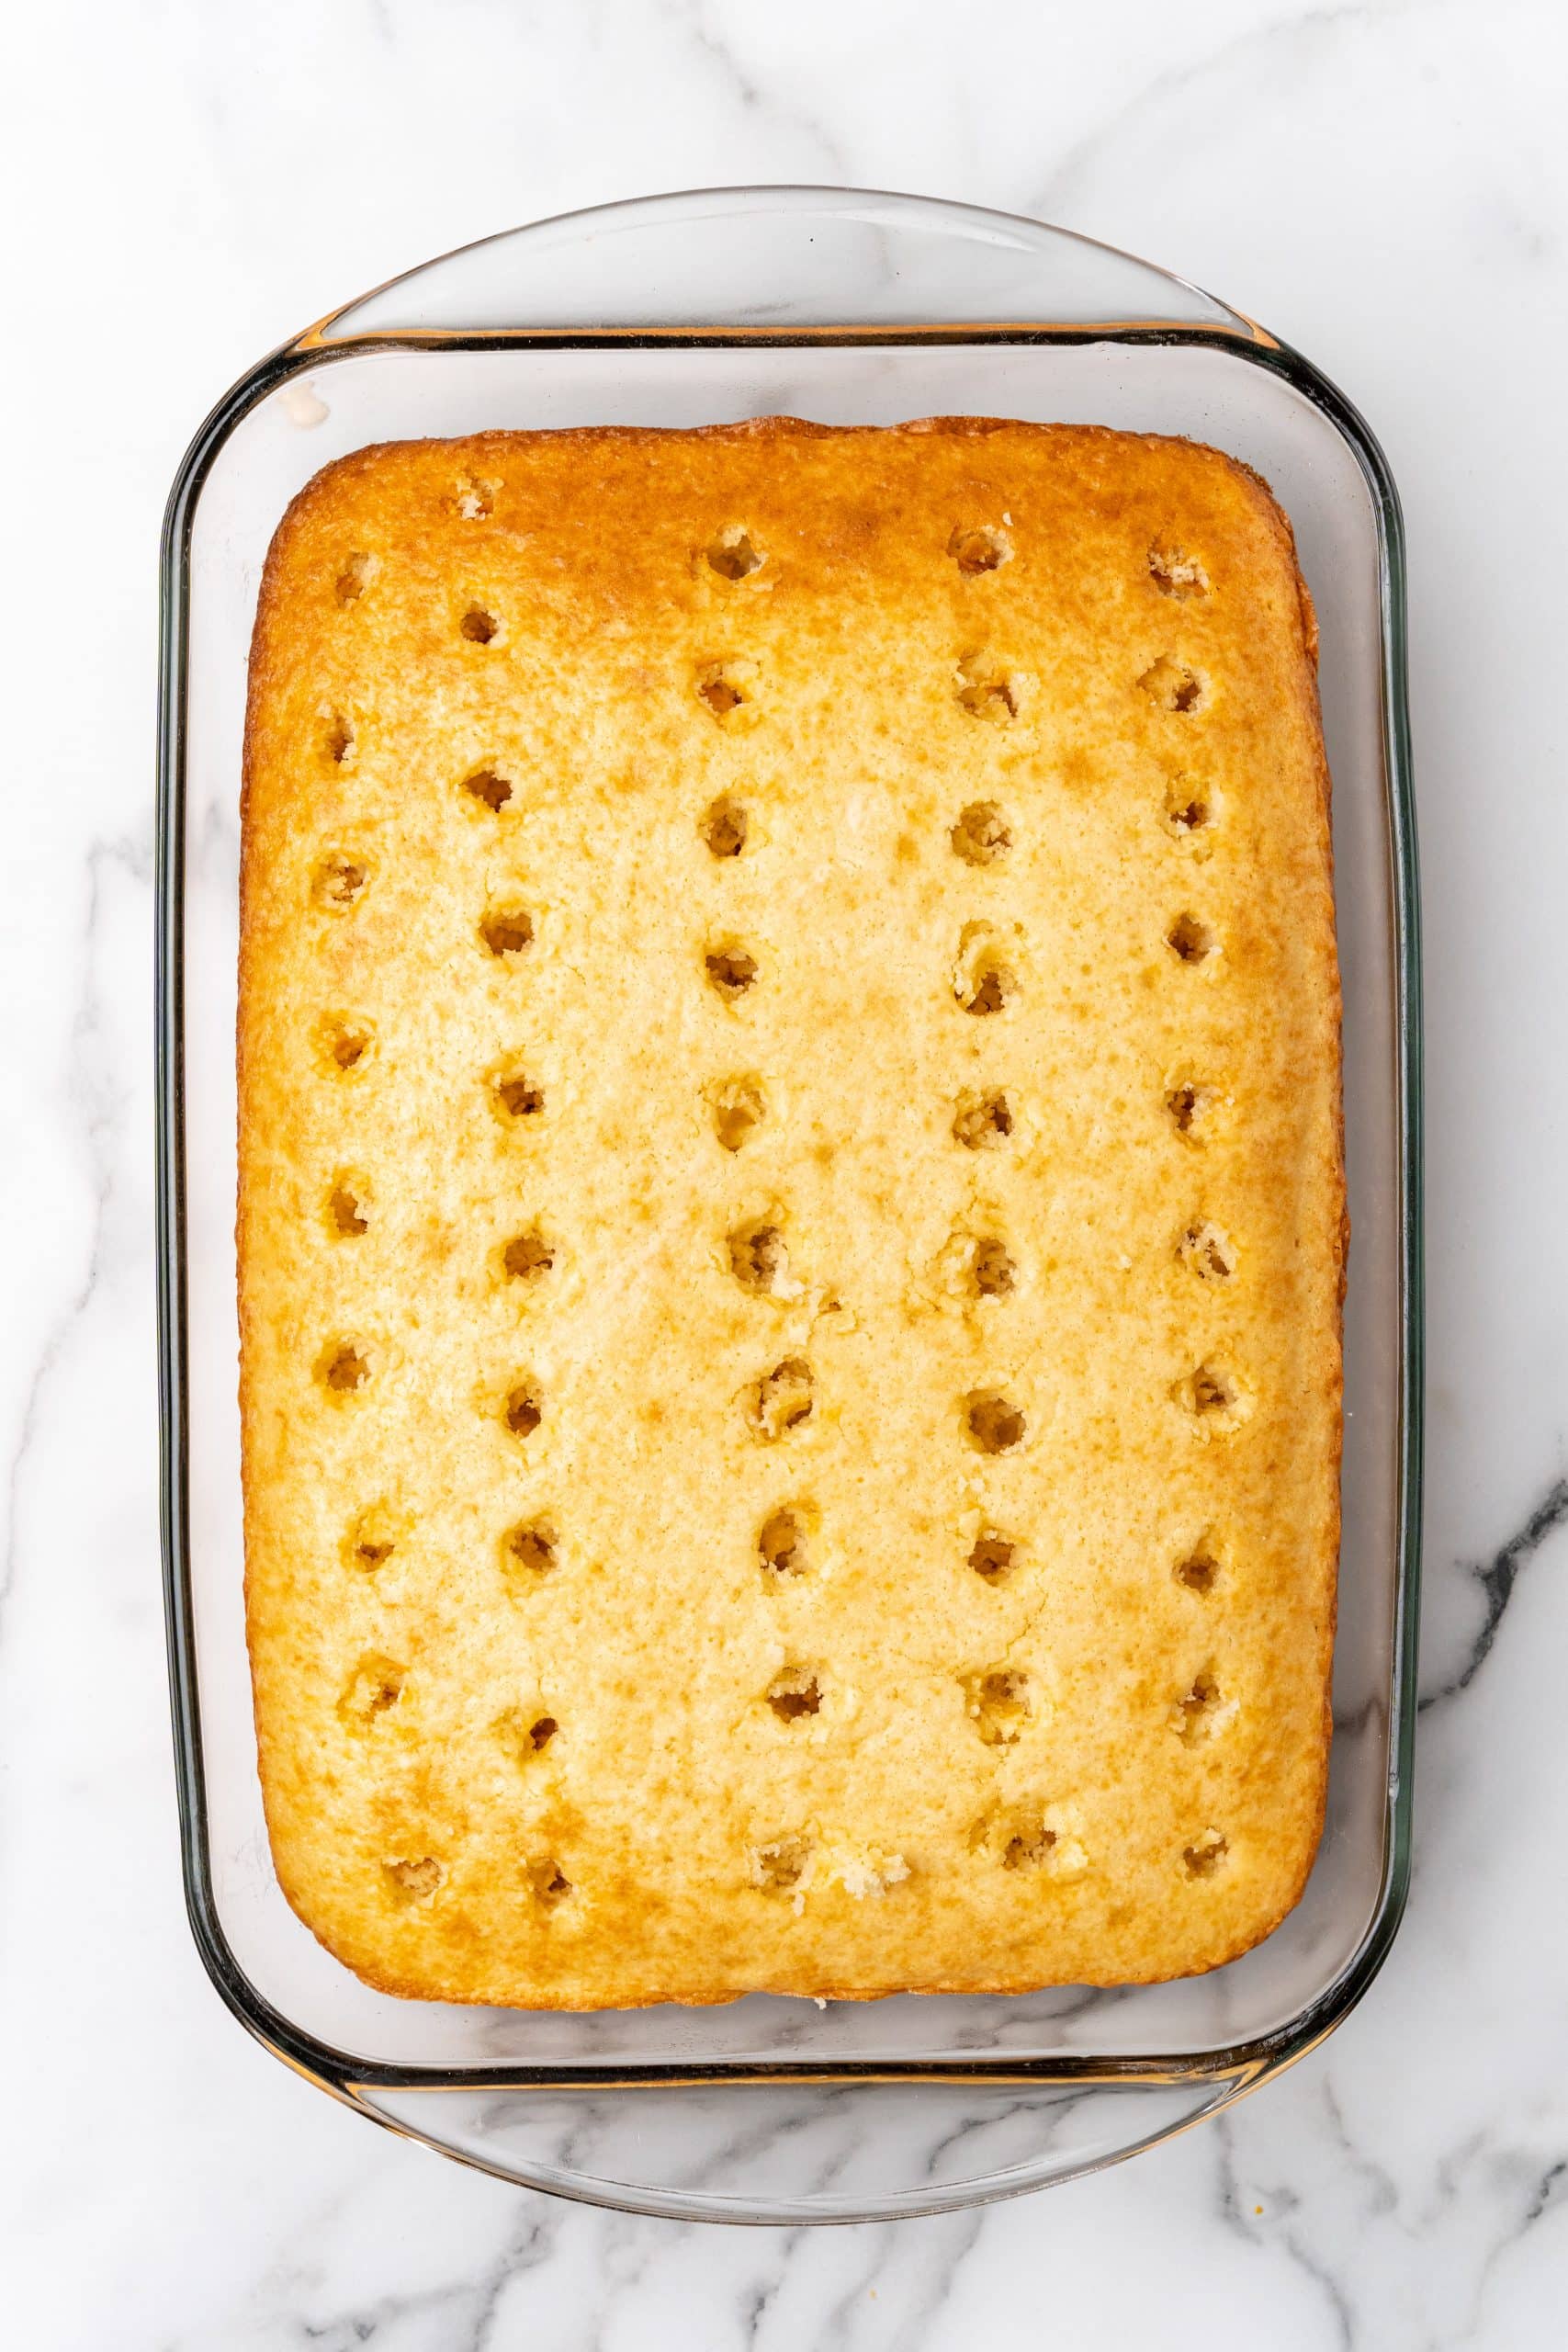 a baked cake with holes poked evenly out over the surface